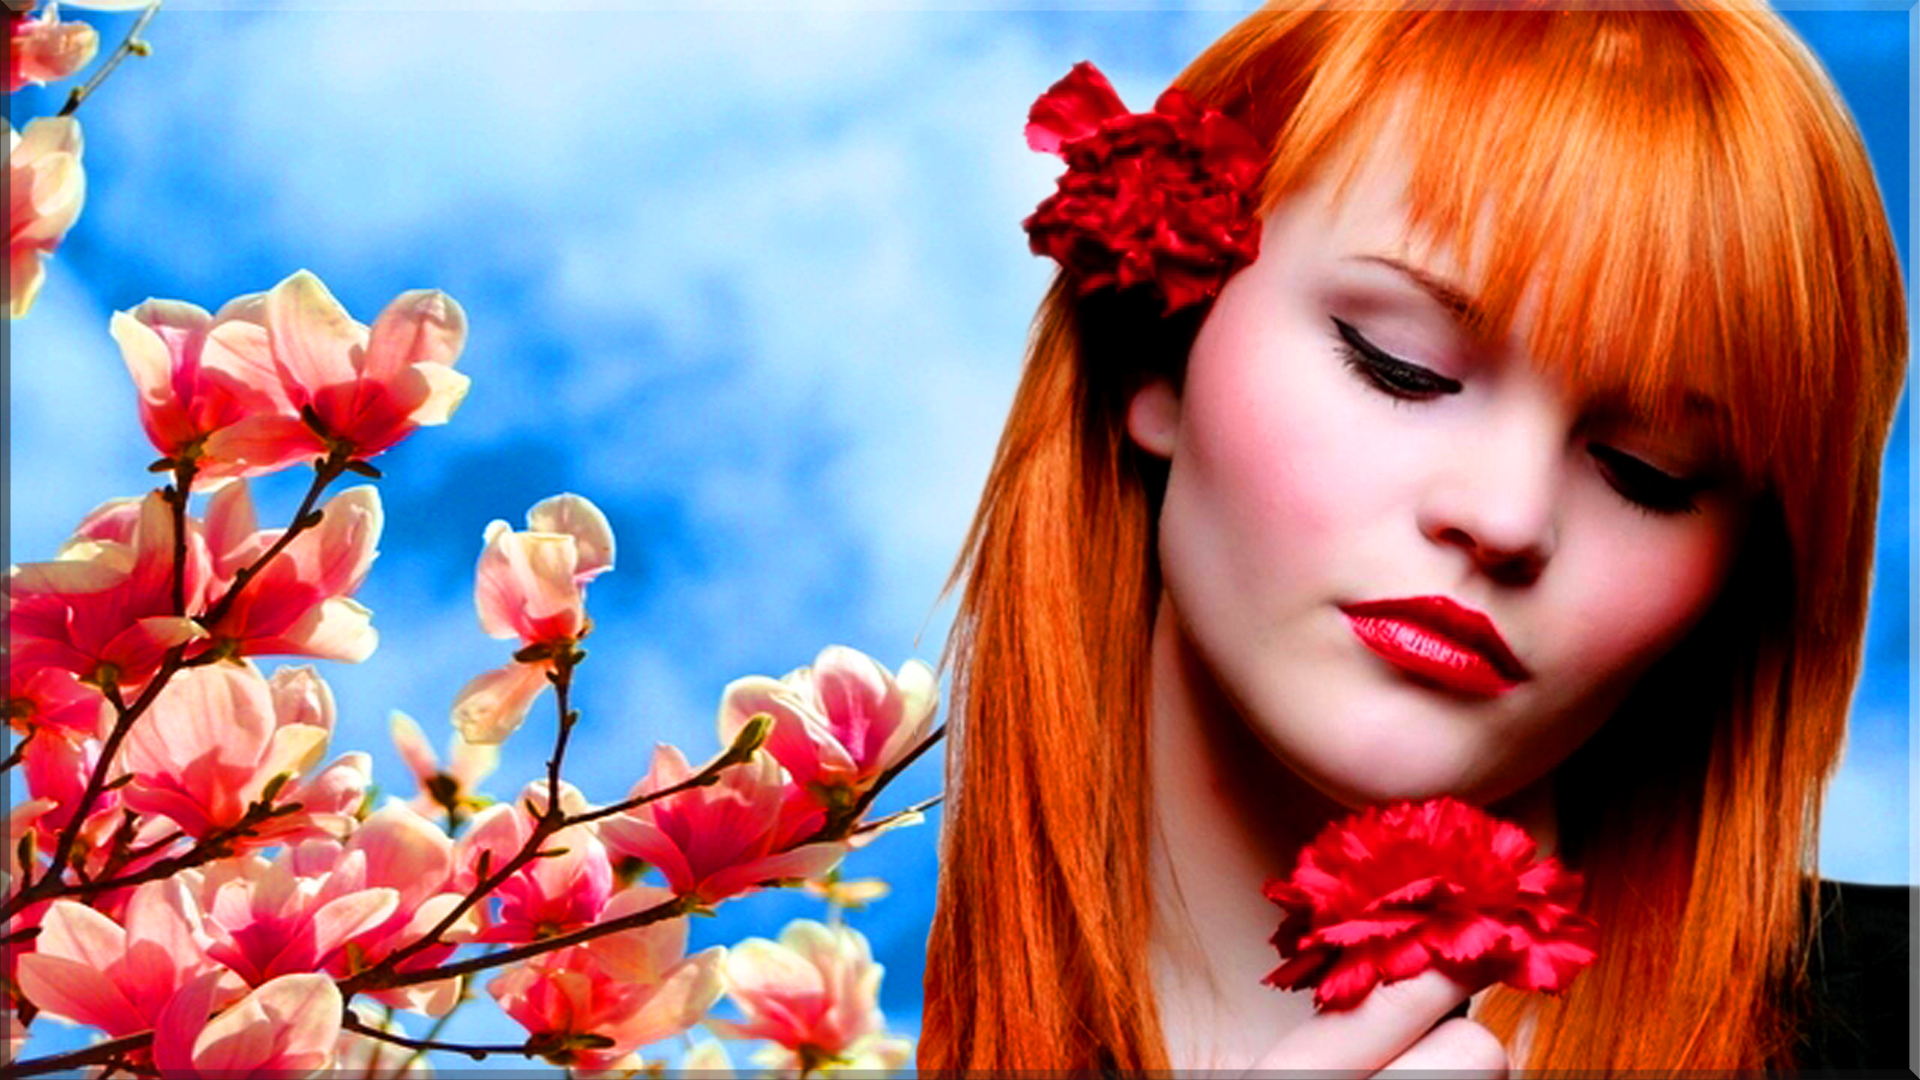 Redhead With Flowers HD Wallpaper | Background Image | 1920x1080 | ID